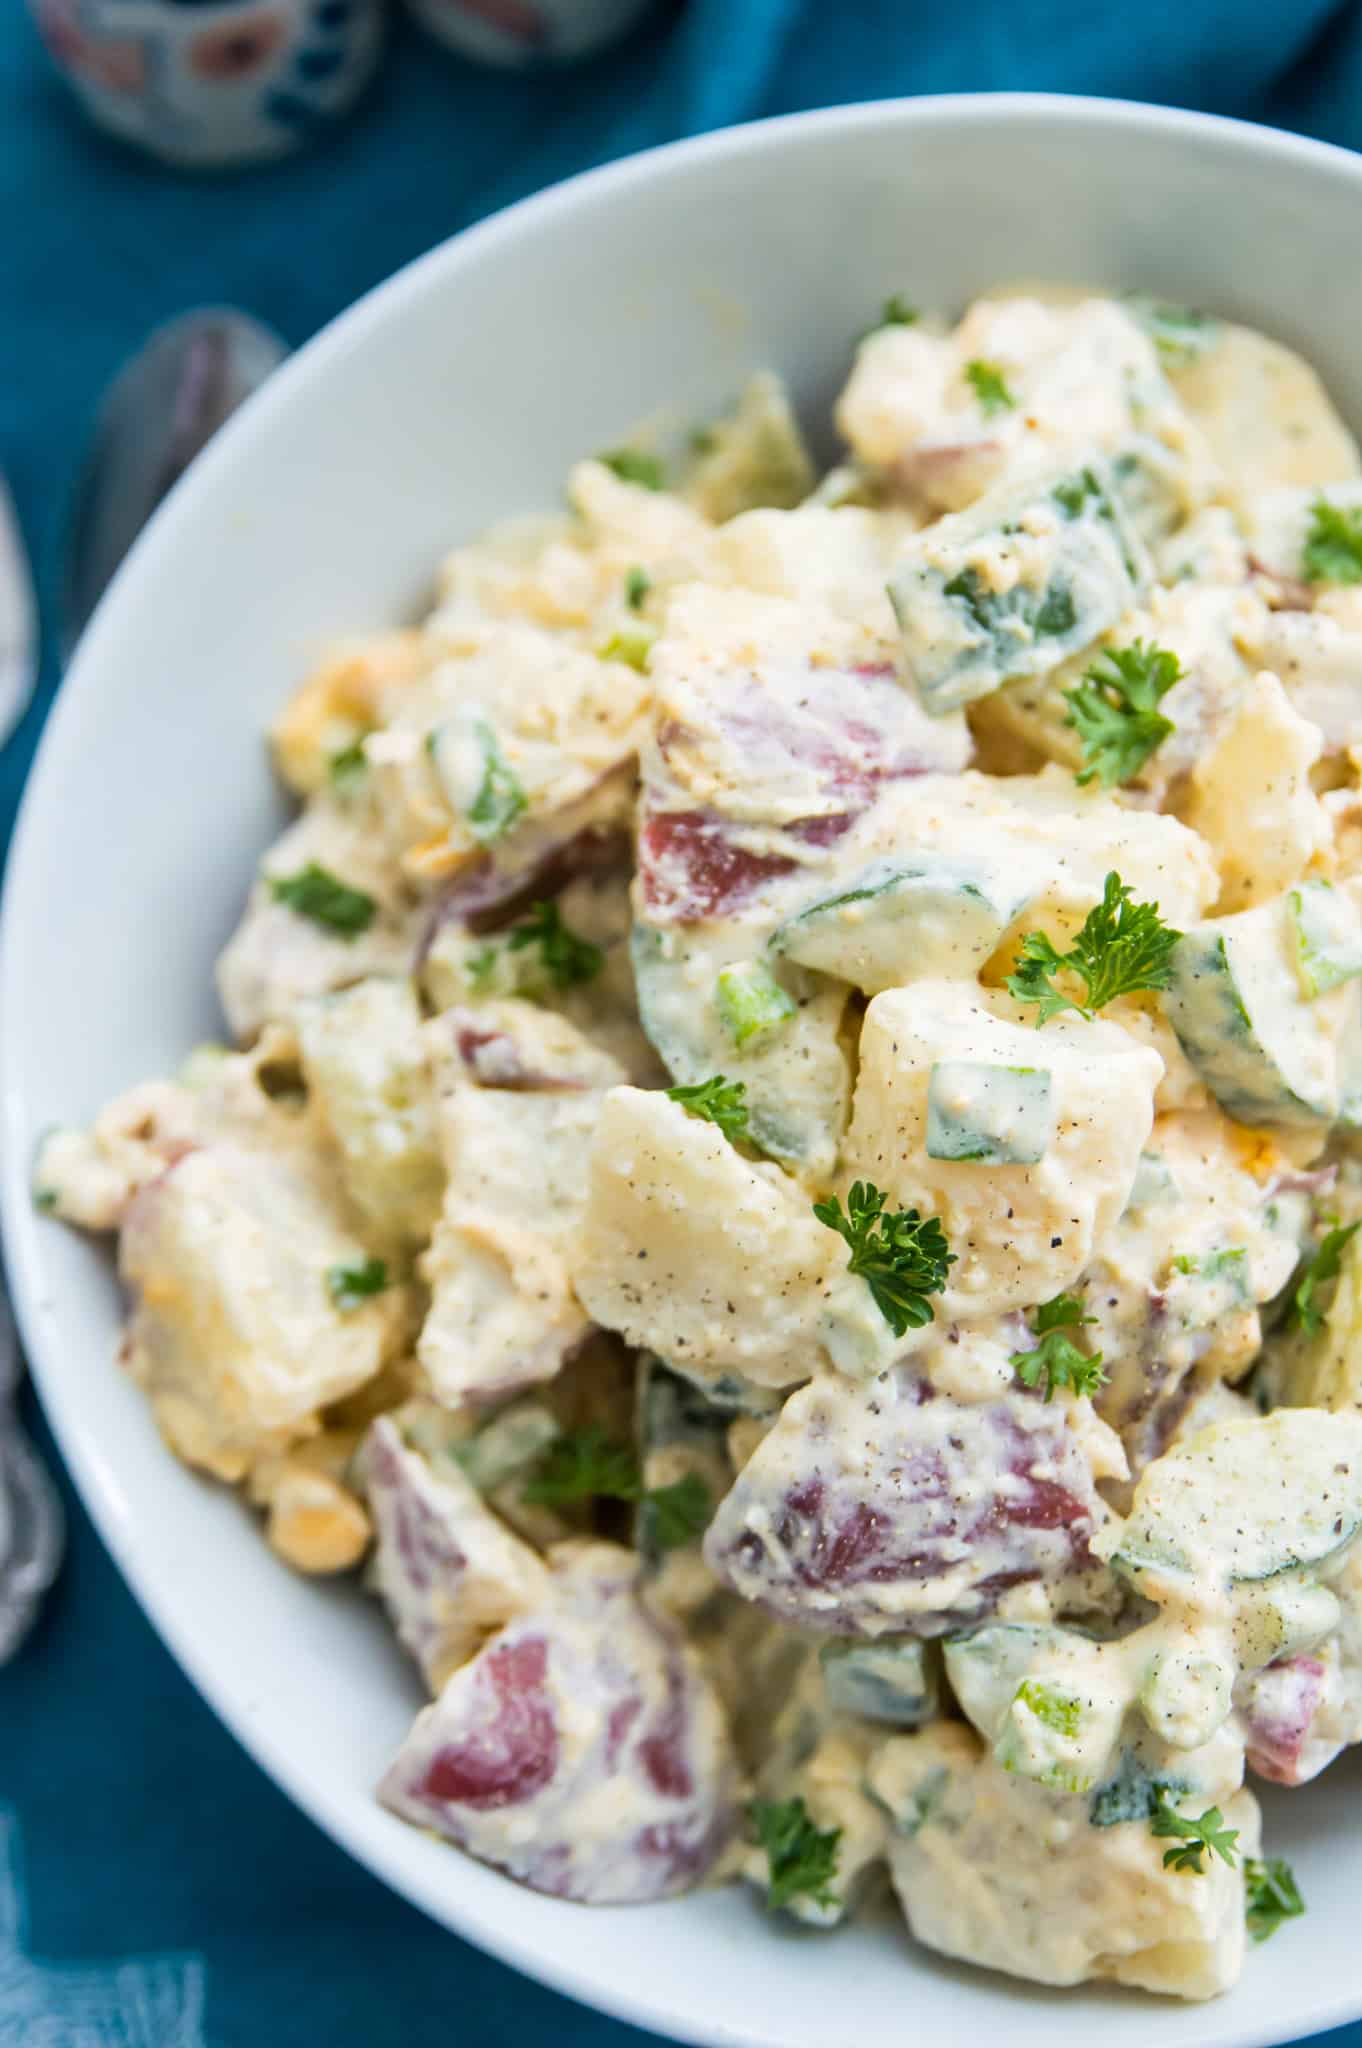 A bowl of potato salad garnished with parsley.